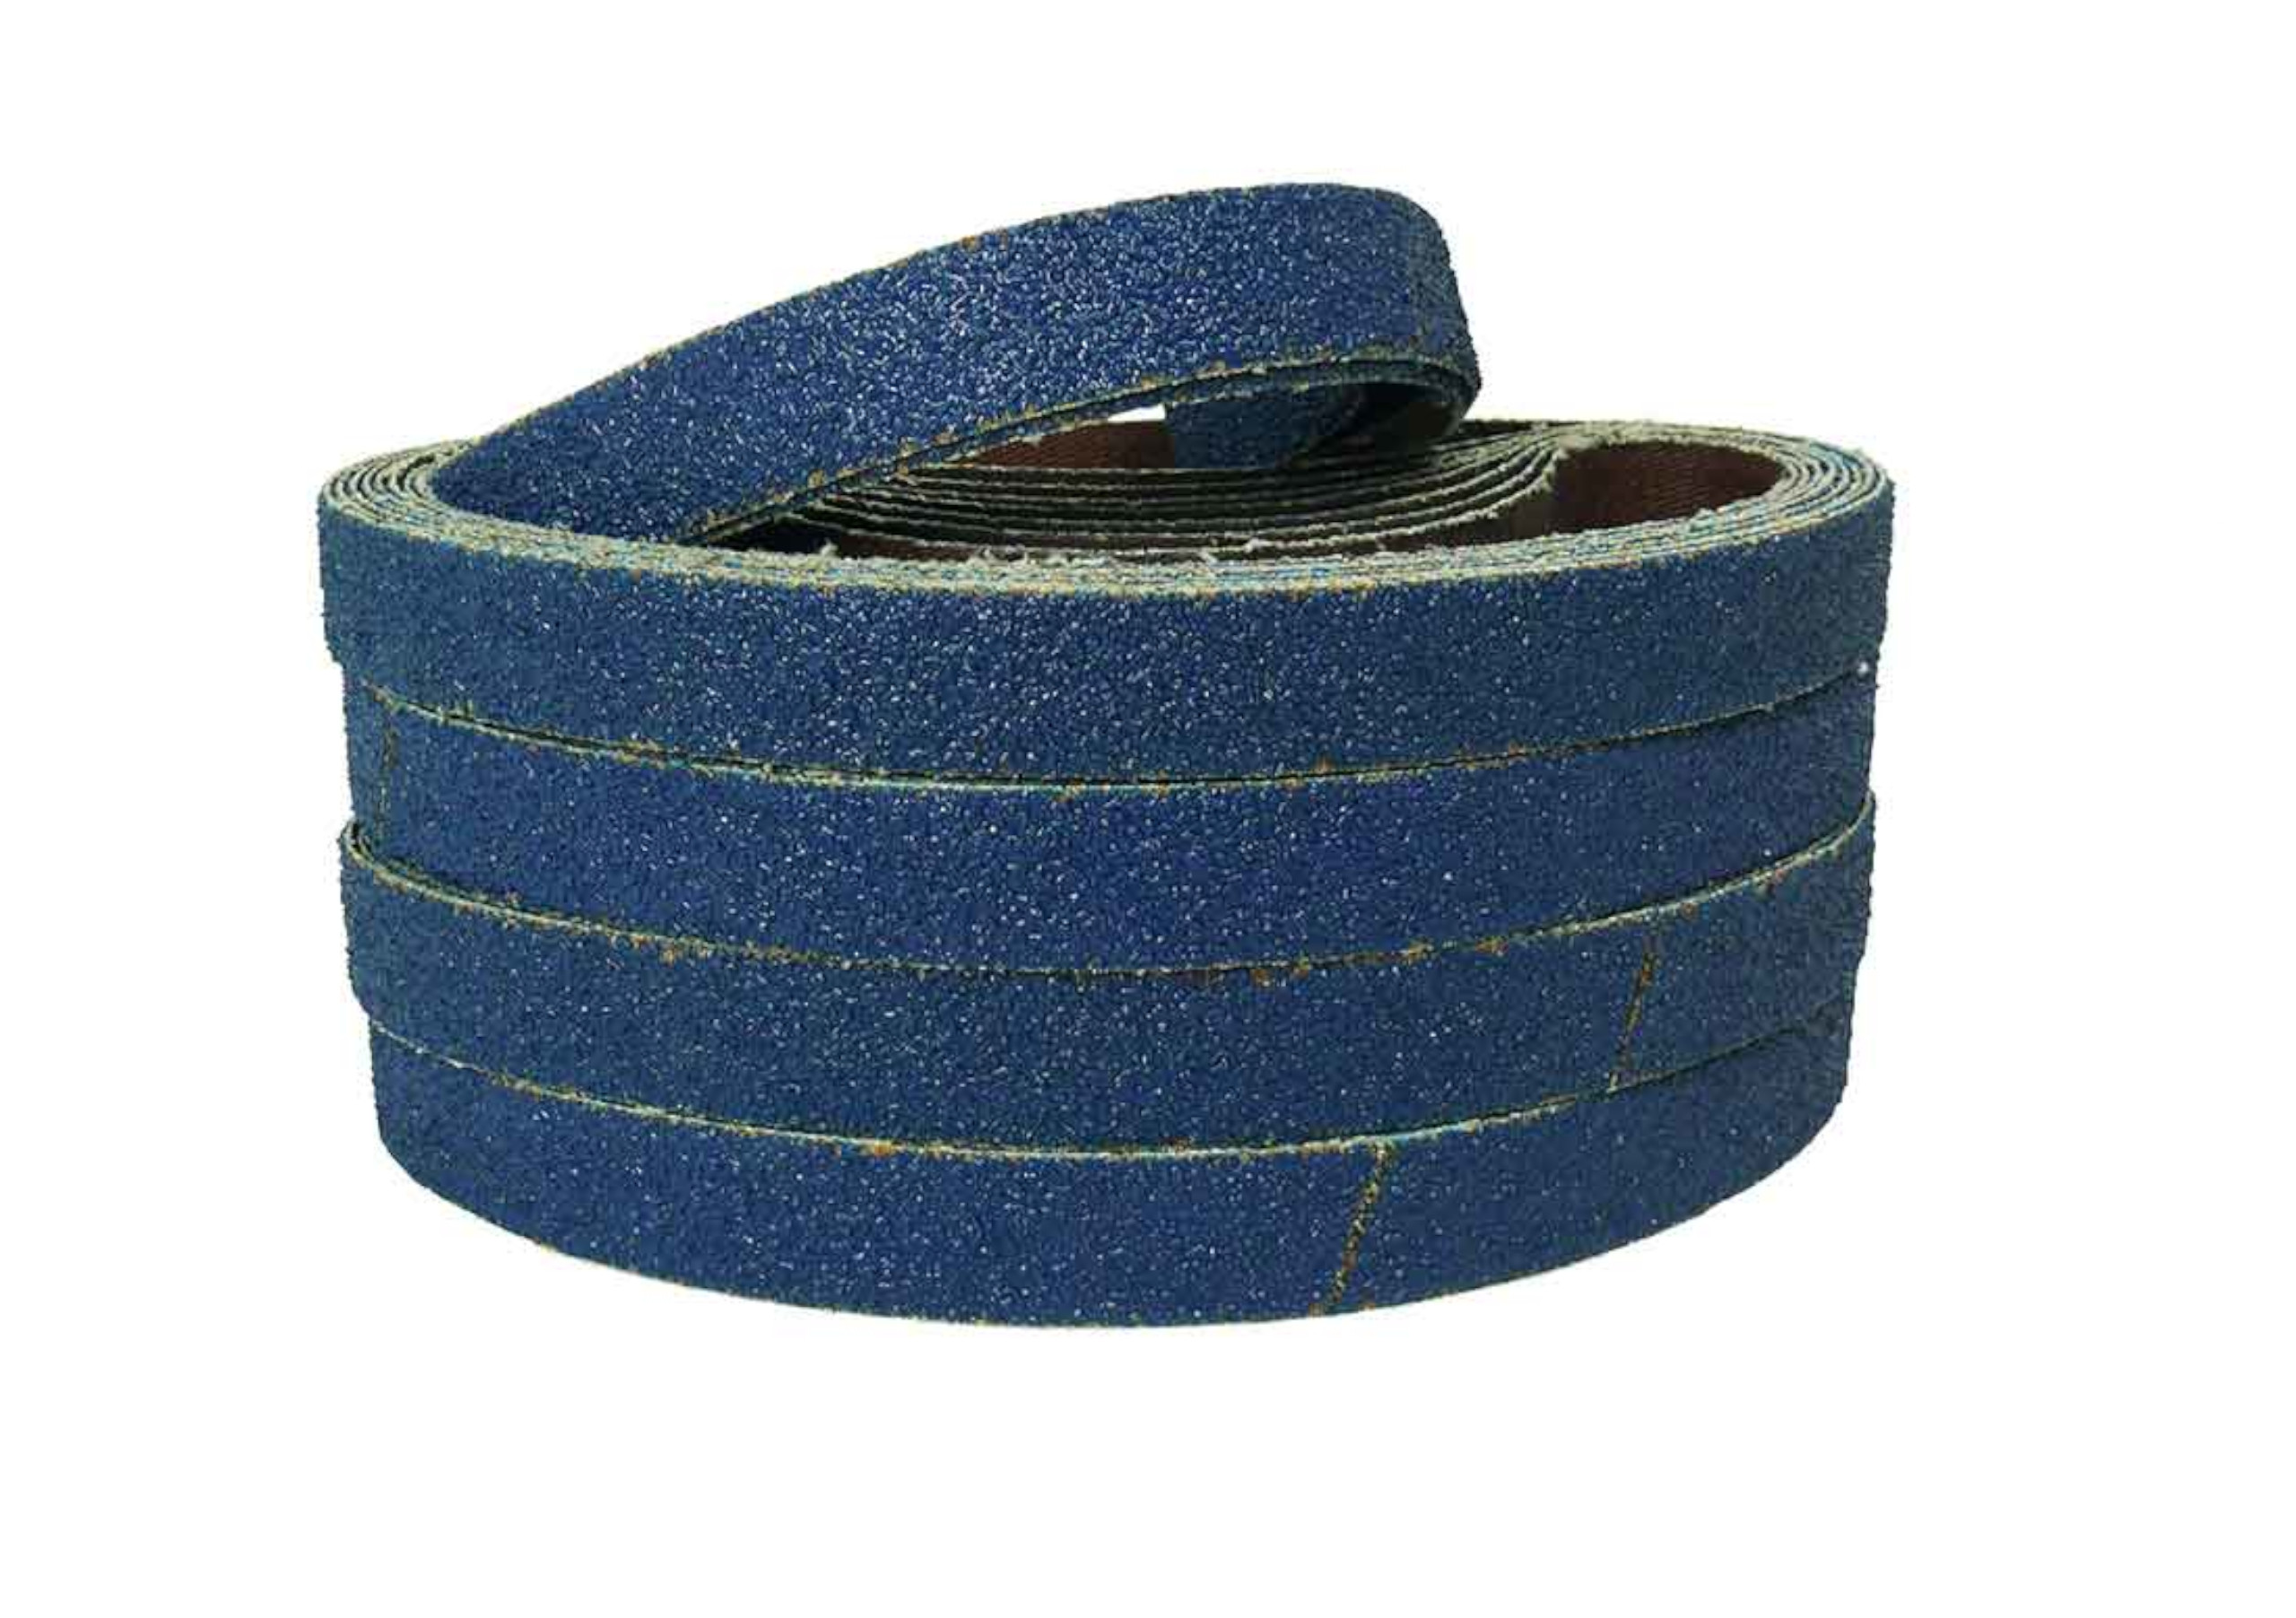 This is an image of our File Belts